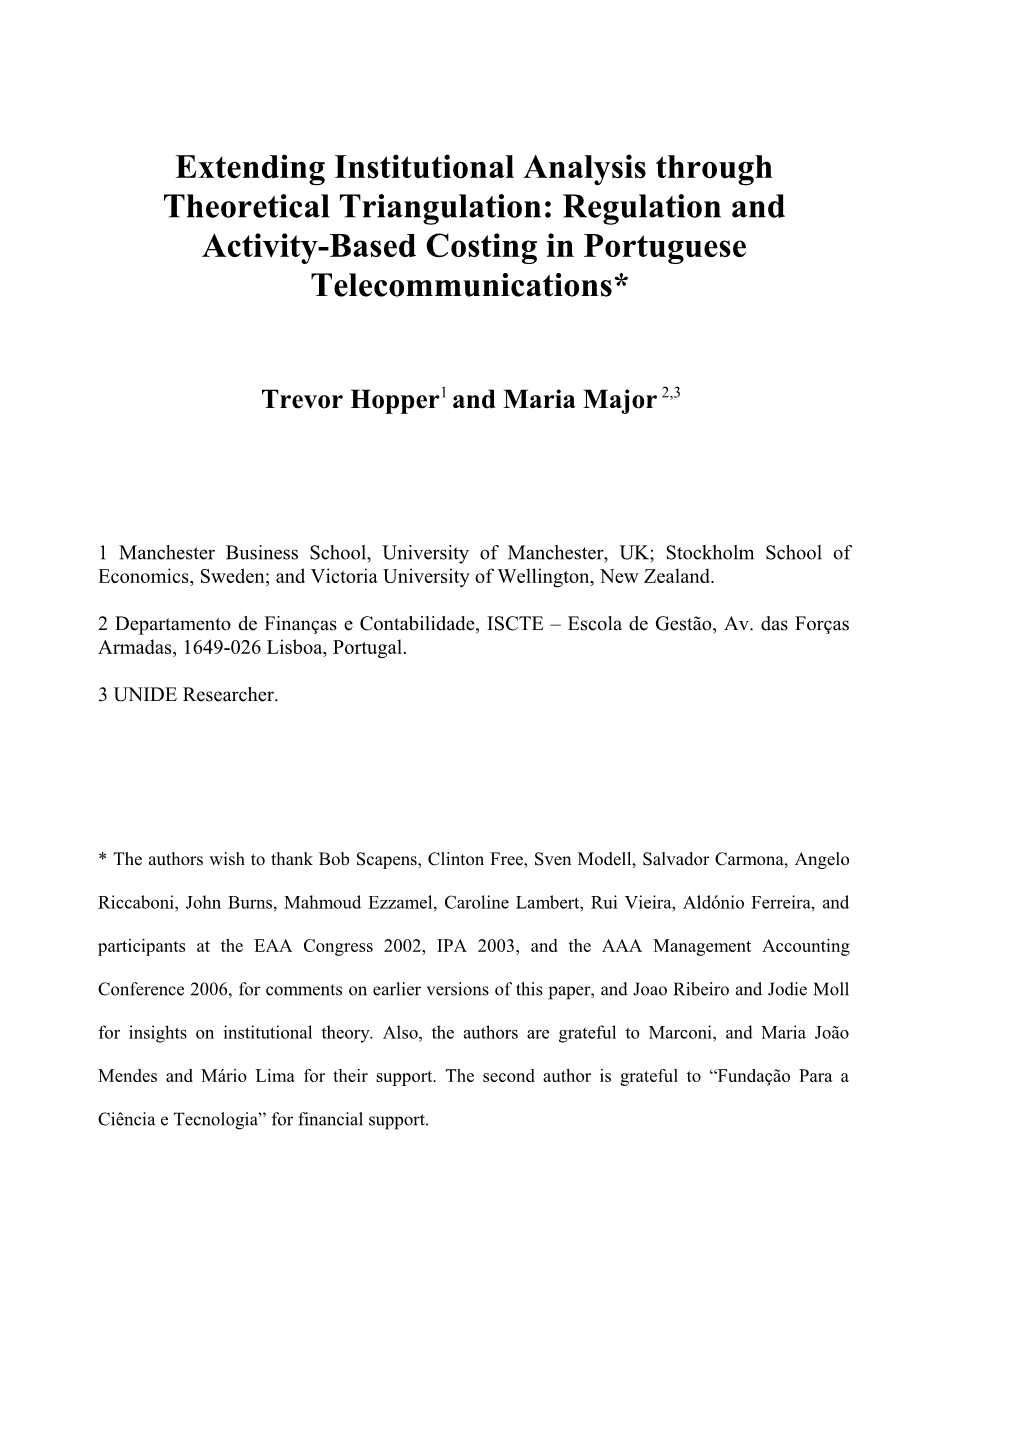 Extending New Institutional Theory: a Case Study of Activity-Based Costing in the Portuguese